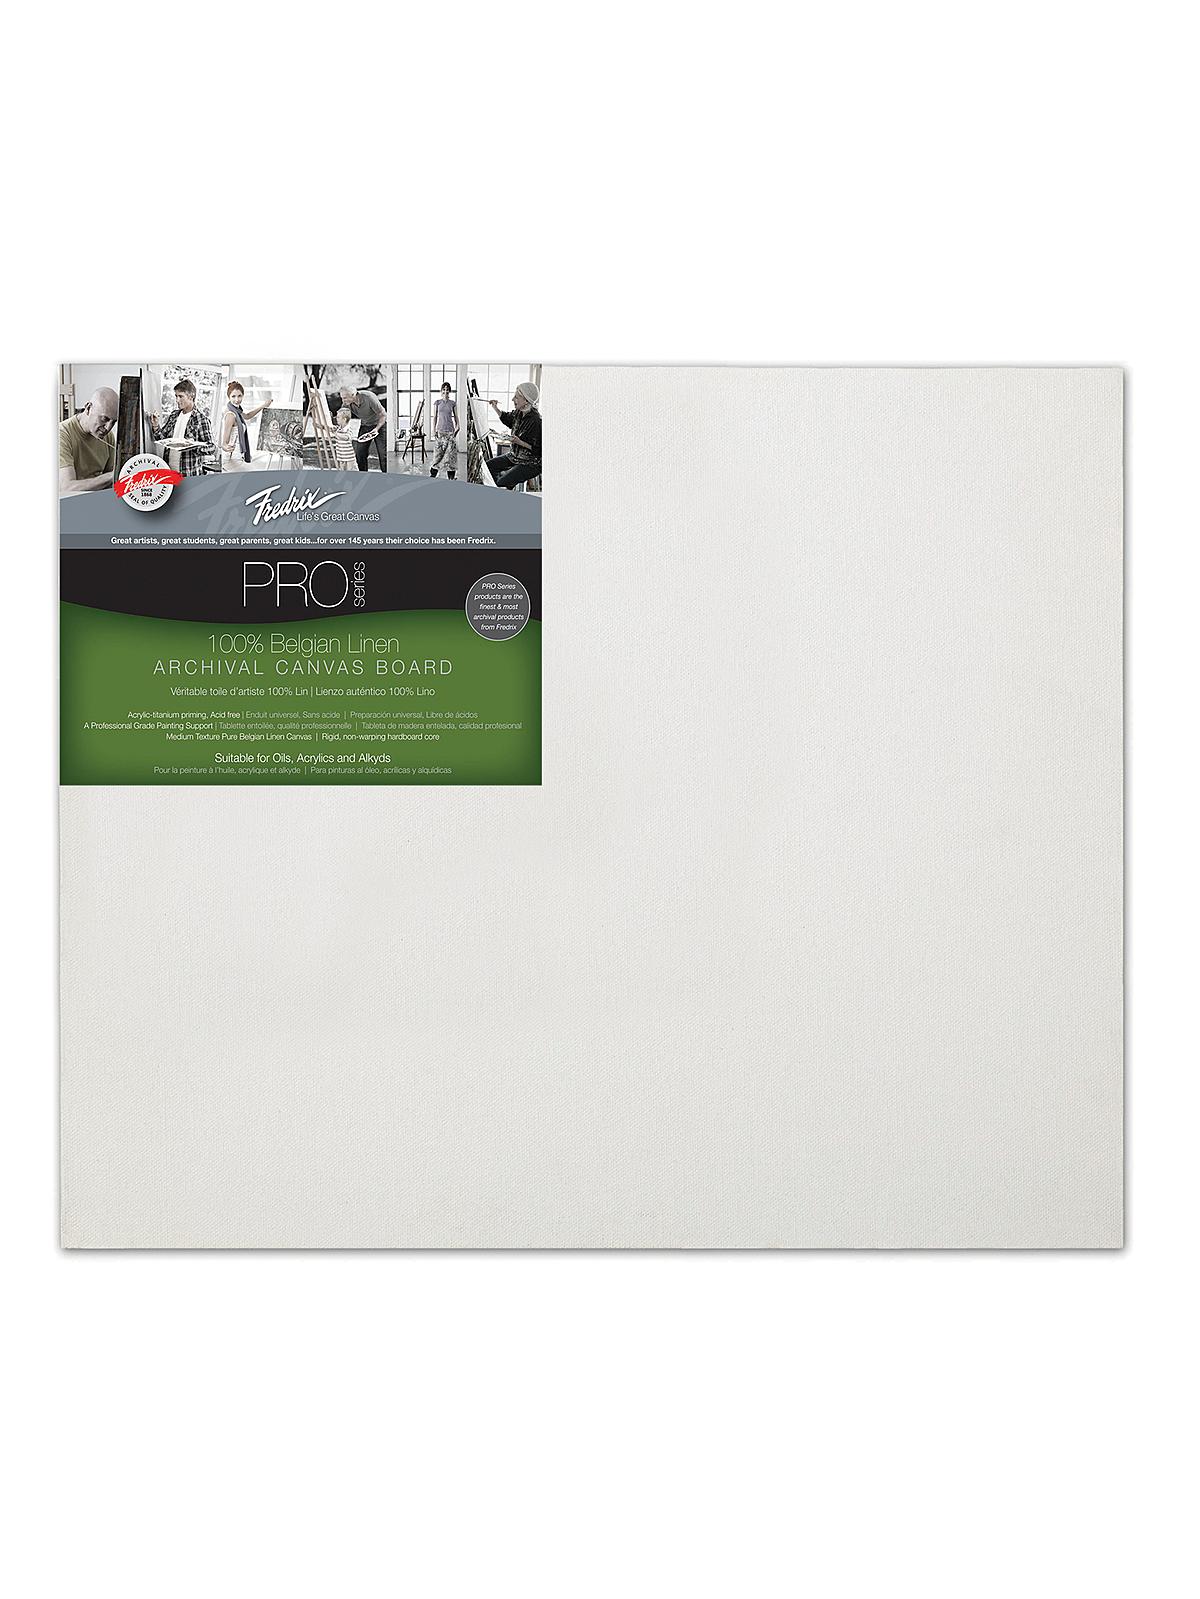 Pro Series Archival Linen Canvas Boards 16 In. X 20 In. Acrylic Priming